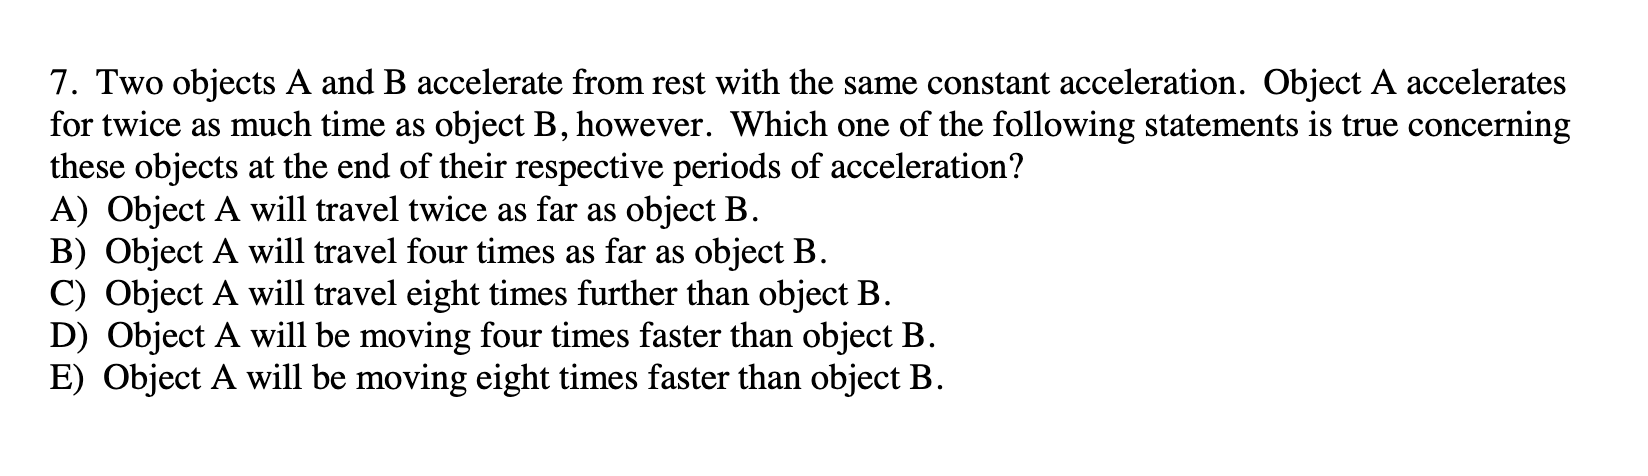 7. Two objects A and B accelerate from rest with the same constant acceleration. Object A accelerates
for twice as much time as object B, however. Which one of the following statements is true concerning
these objects at the end of their respective periods of acceleration?
A) Object A will travel twice as far as object B.
B) Object A will travel four times as far as object B.
C) Object A will travel eight times further than object B.
D) Object A will be moving four times faster than object B.
E) Object A will be moving eight times faster than object B.
